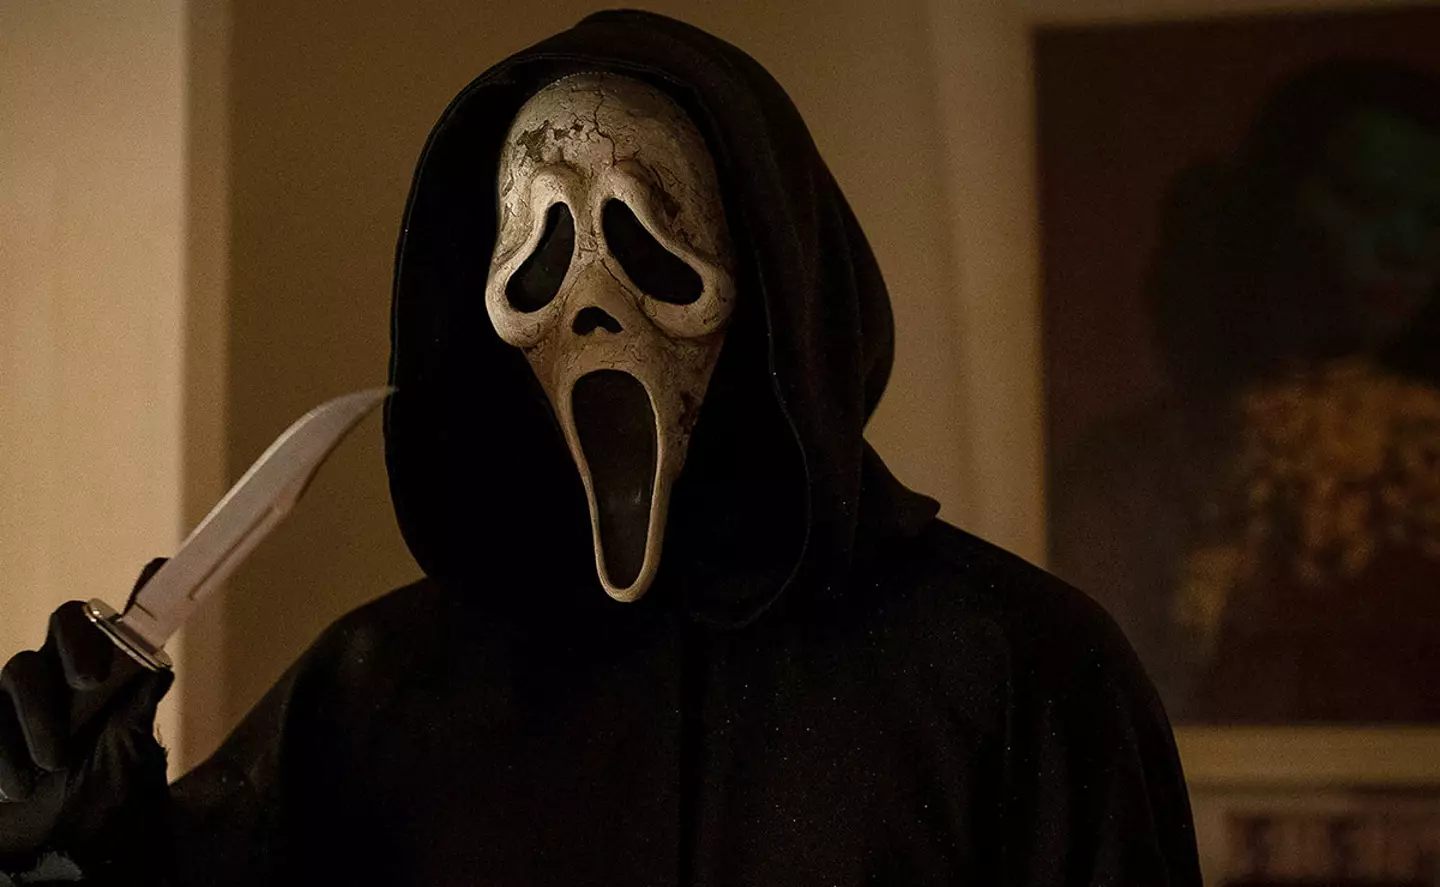 Ghostface is back, this time in New York.